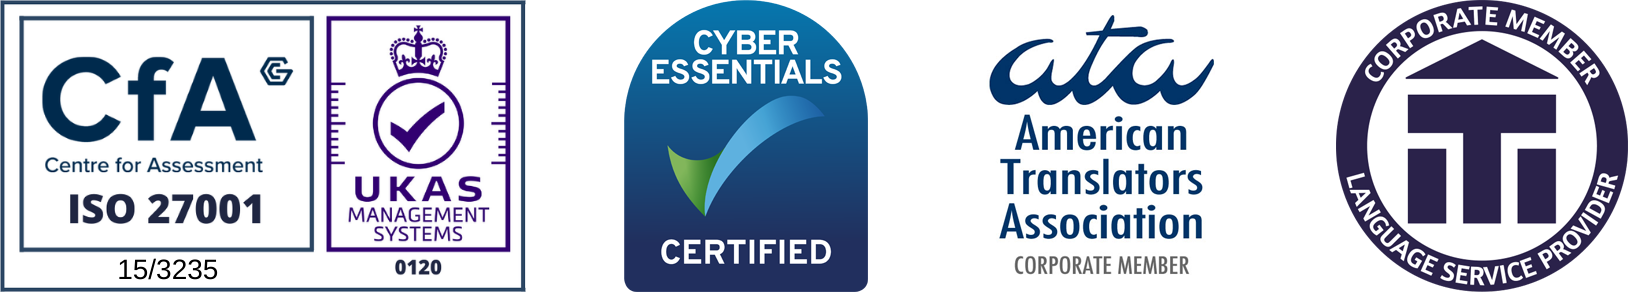 CFA Centre for Assessment ISO 27001 15/3235, UKAS Management Systems 0120, Cyber Essentials Certified